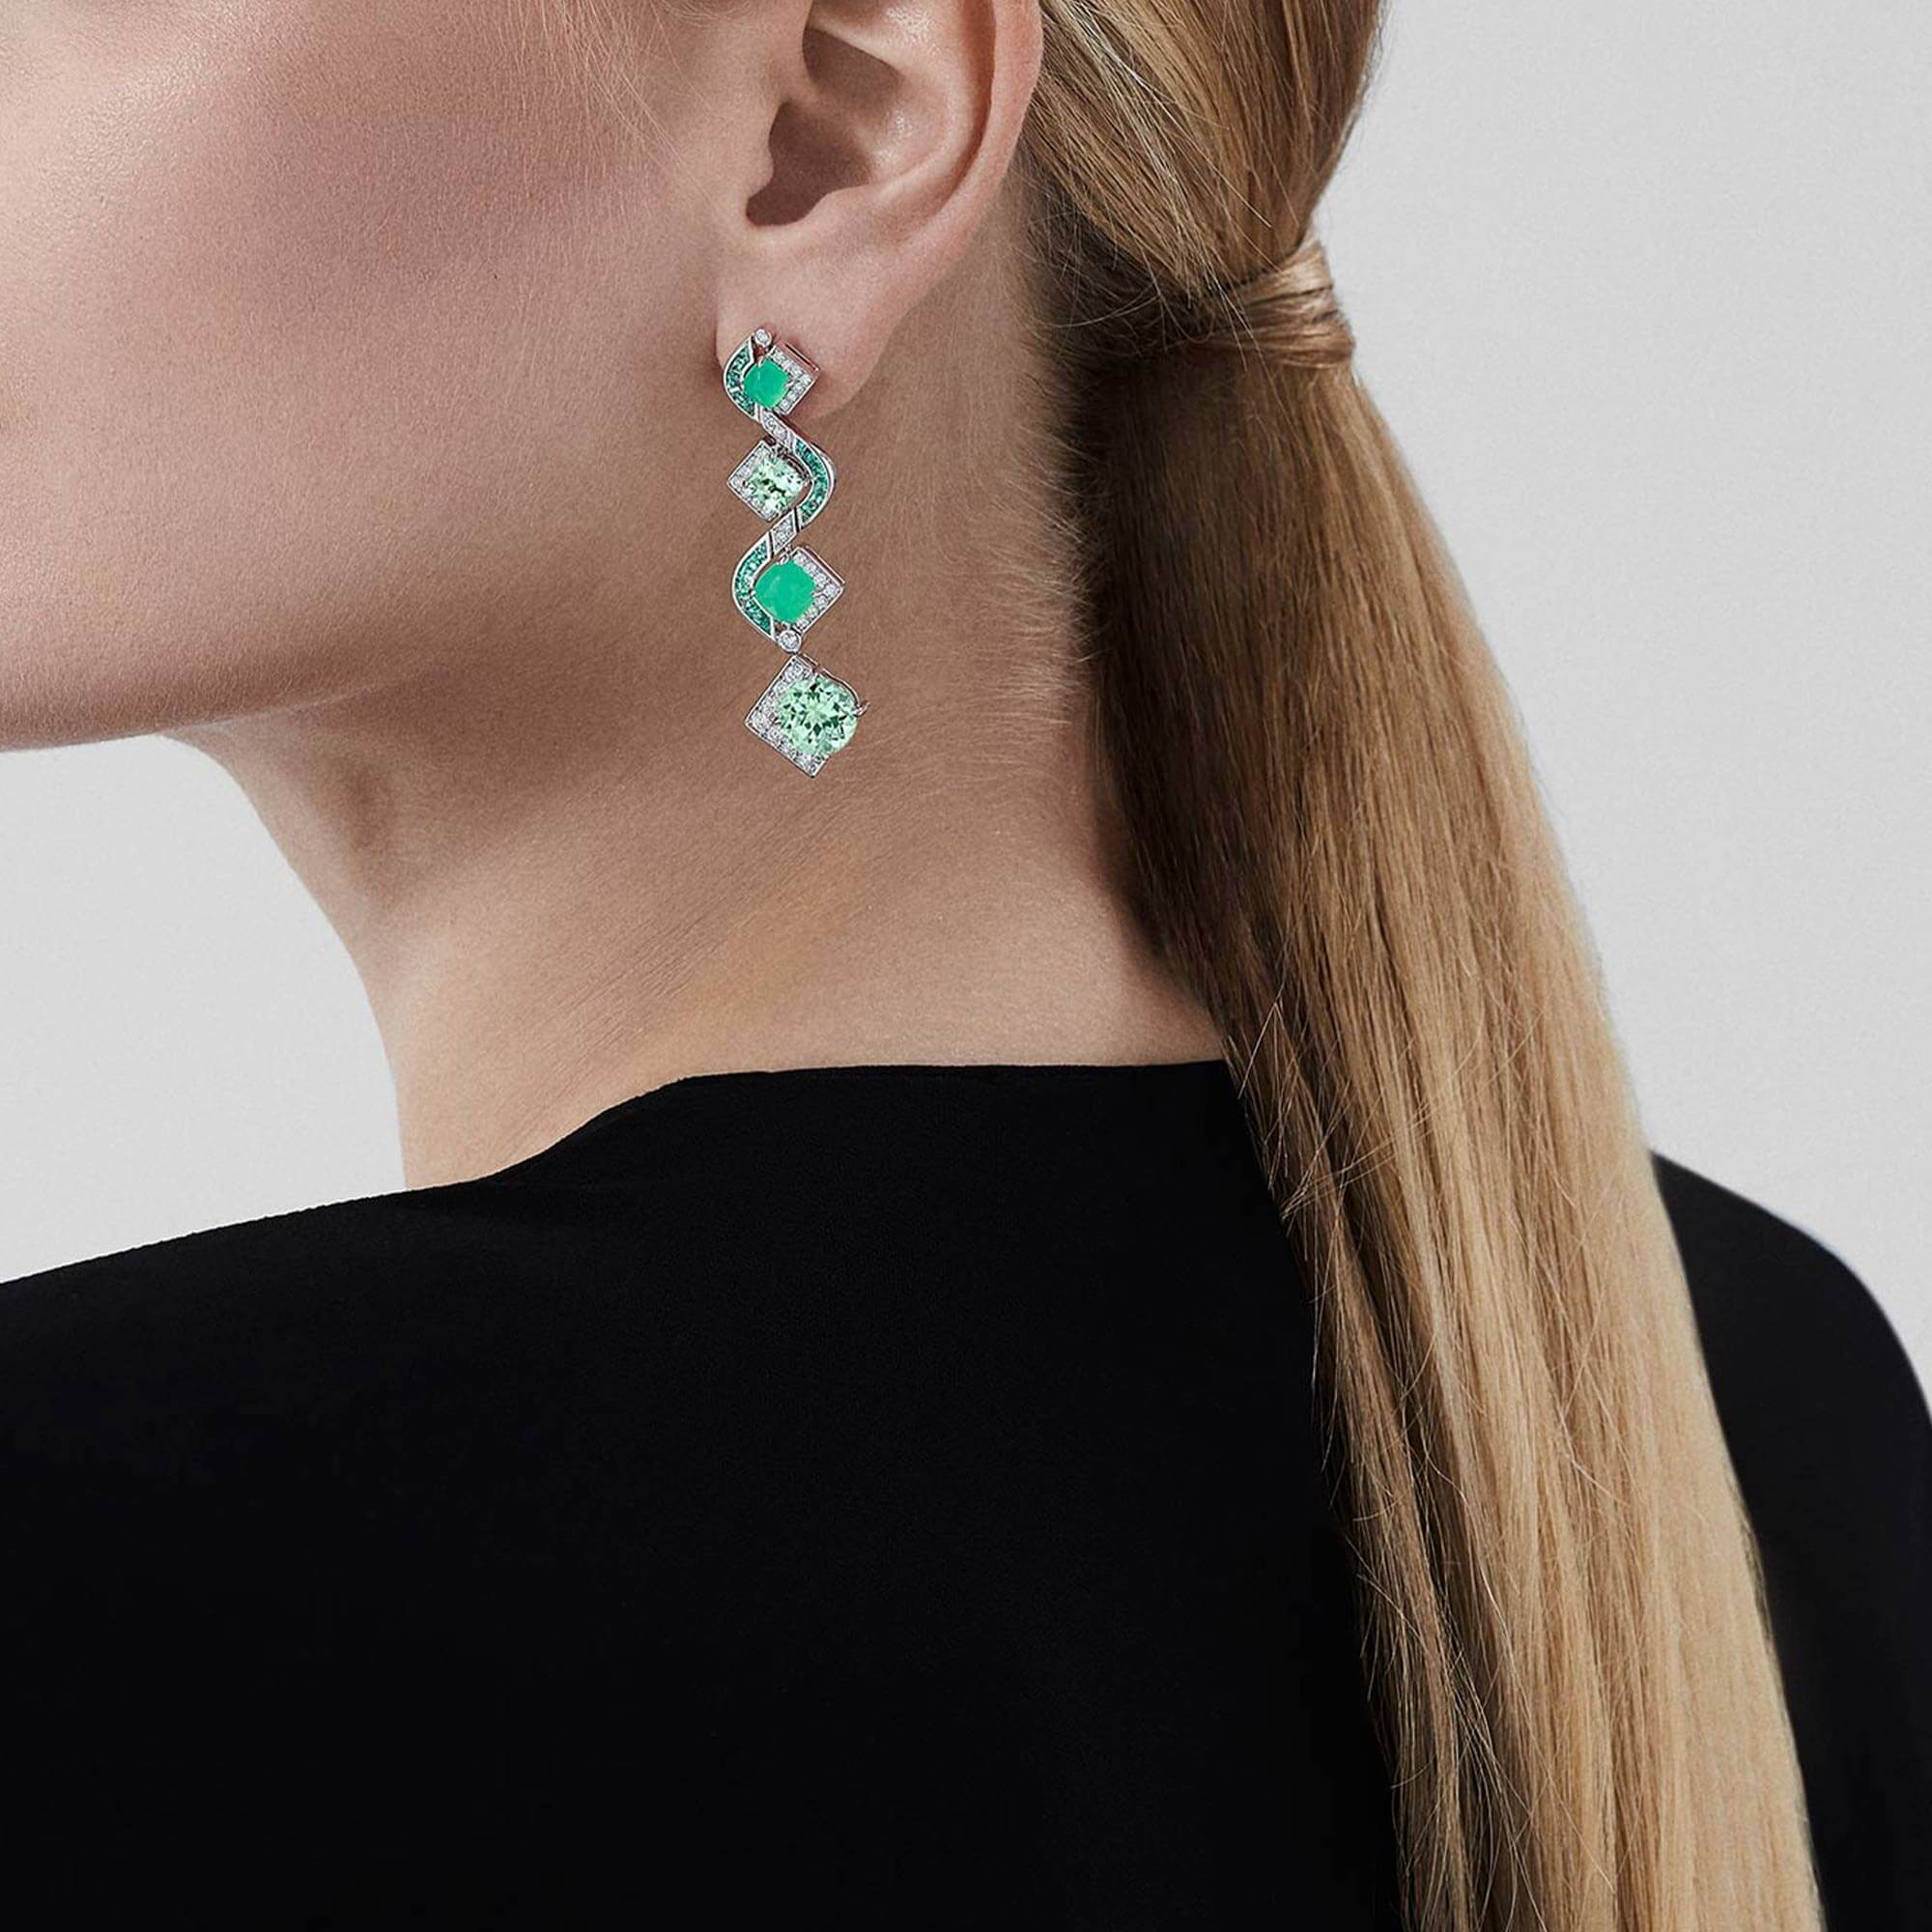 Garrard Couture Serpentine Earrings In 18ct White Gold with Tourmalines Chrysoprase Emeralds and Diamonds 2018567 on Model 1